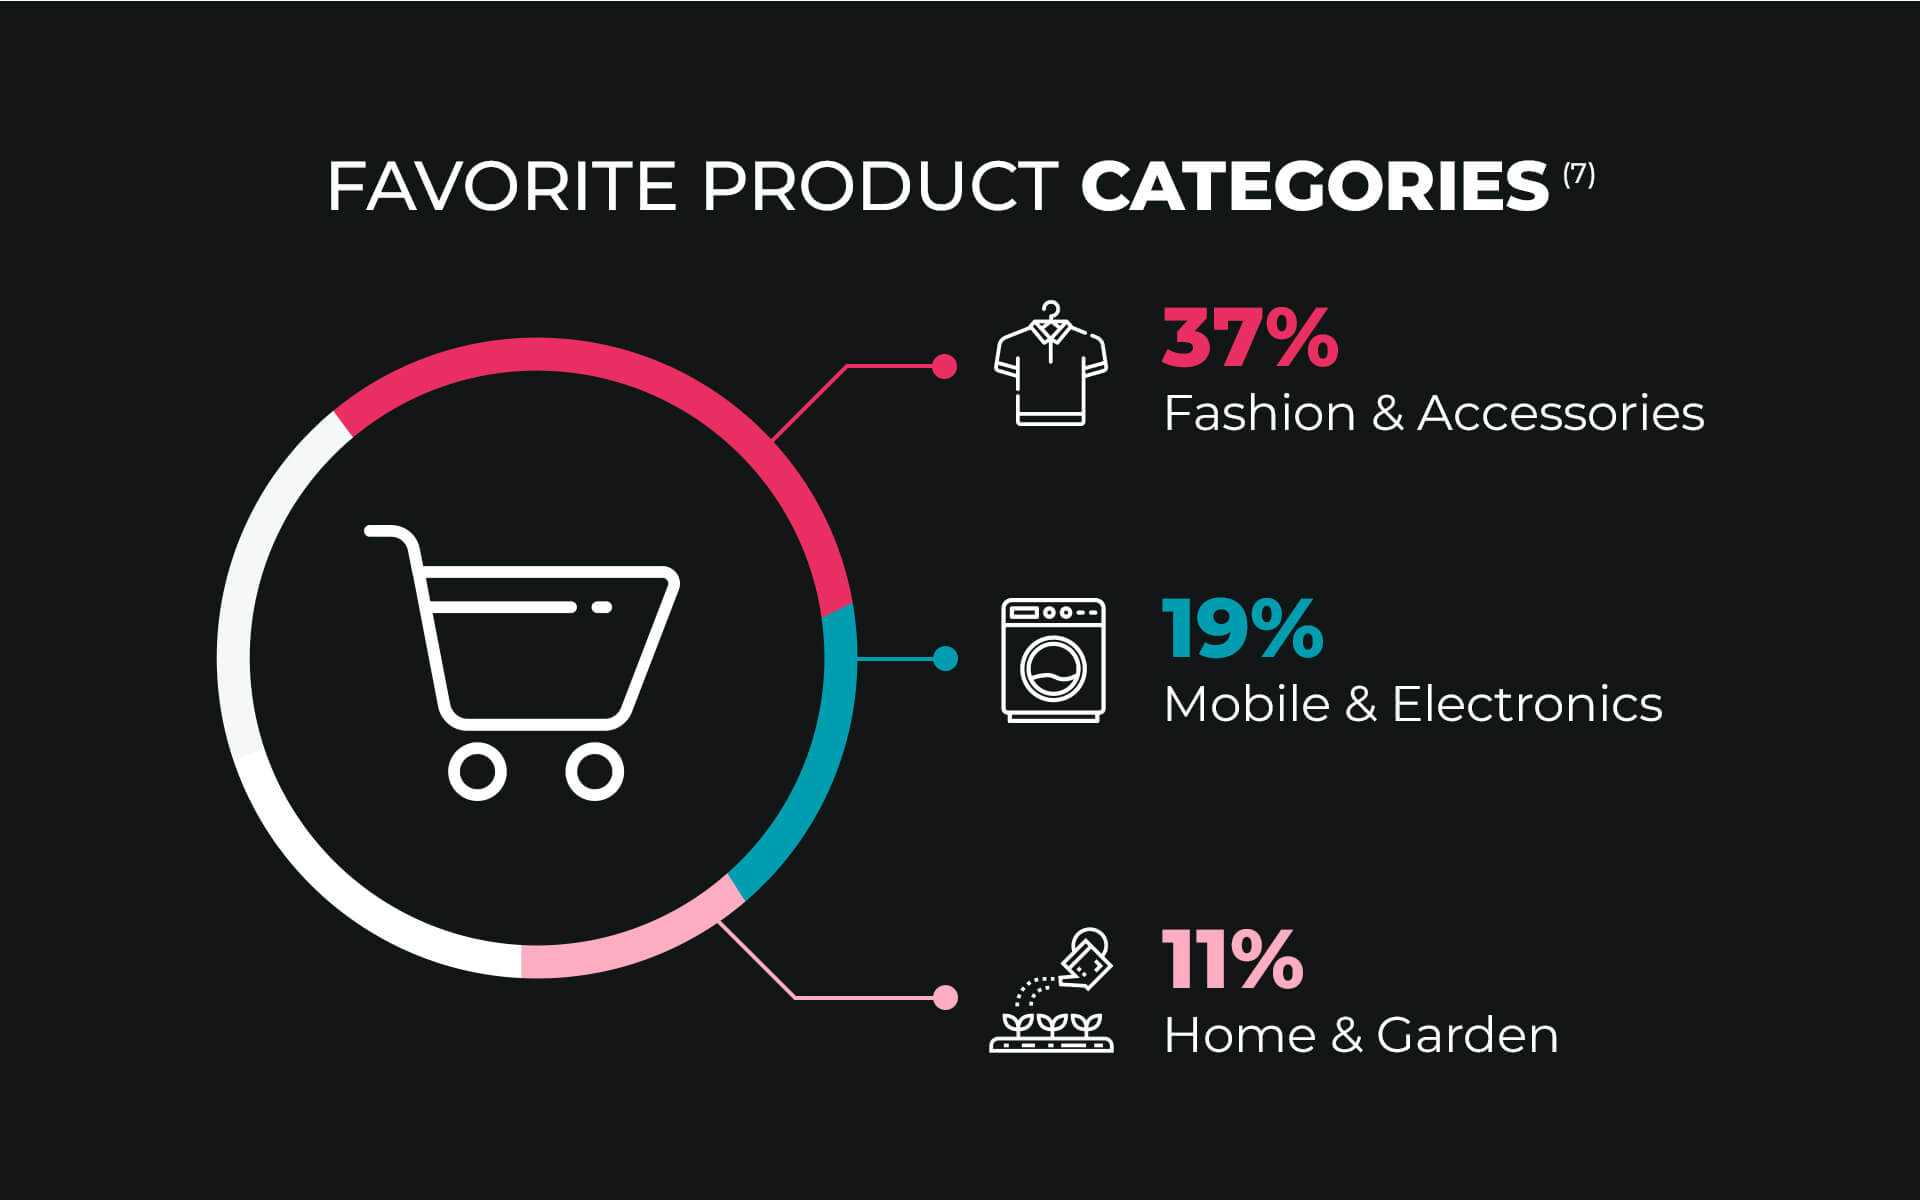 FAVORITE PRODUCT CATEGORIES: 37% FASHION & ACCESSORIES, 19% MOBILE & ELECTRONICS, 11% HOME & GARDEN.